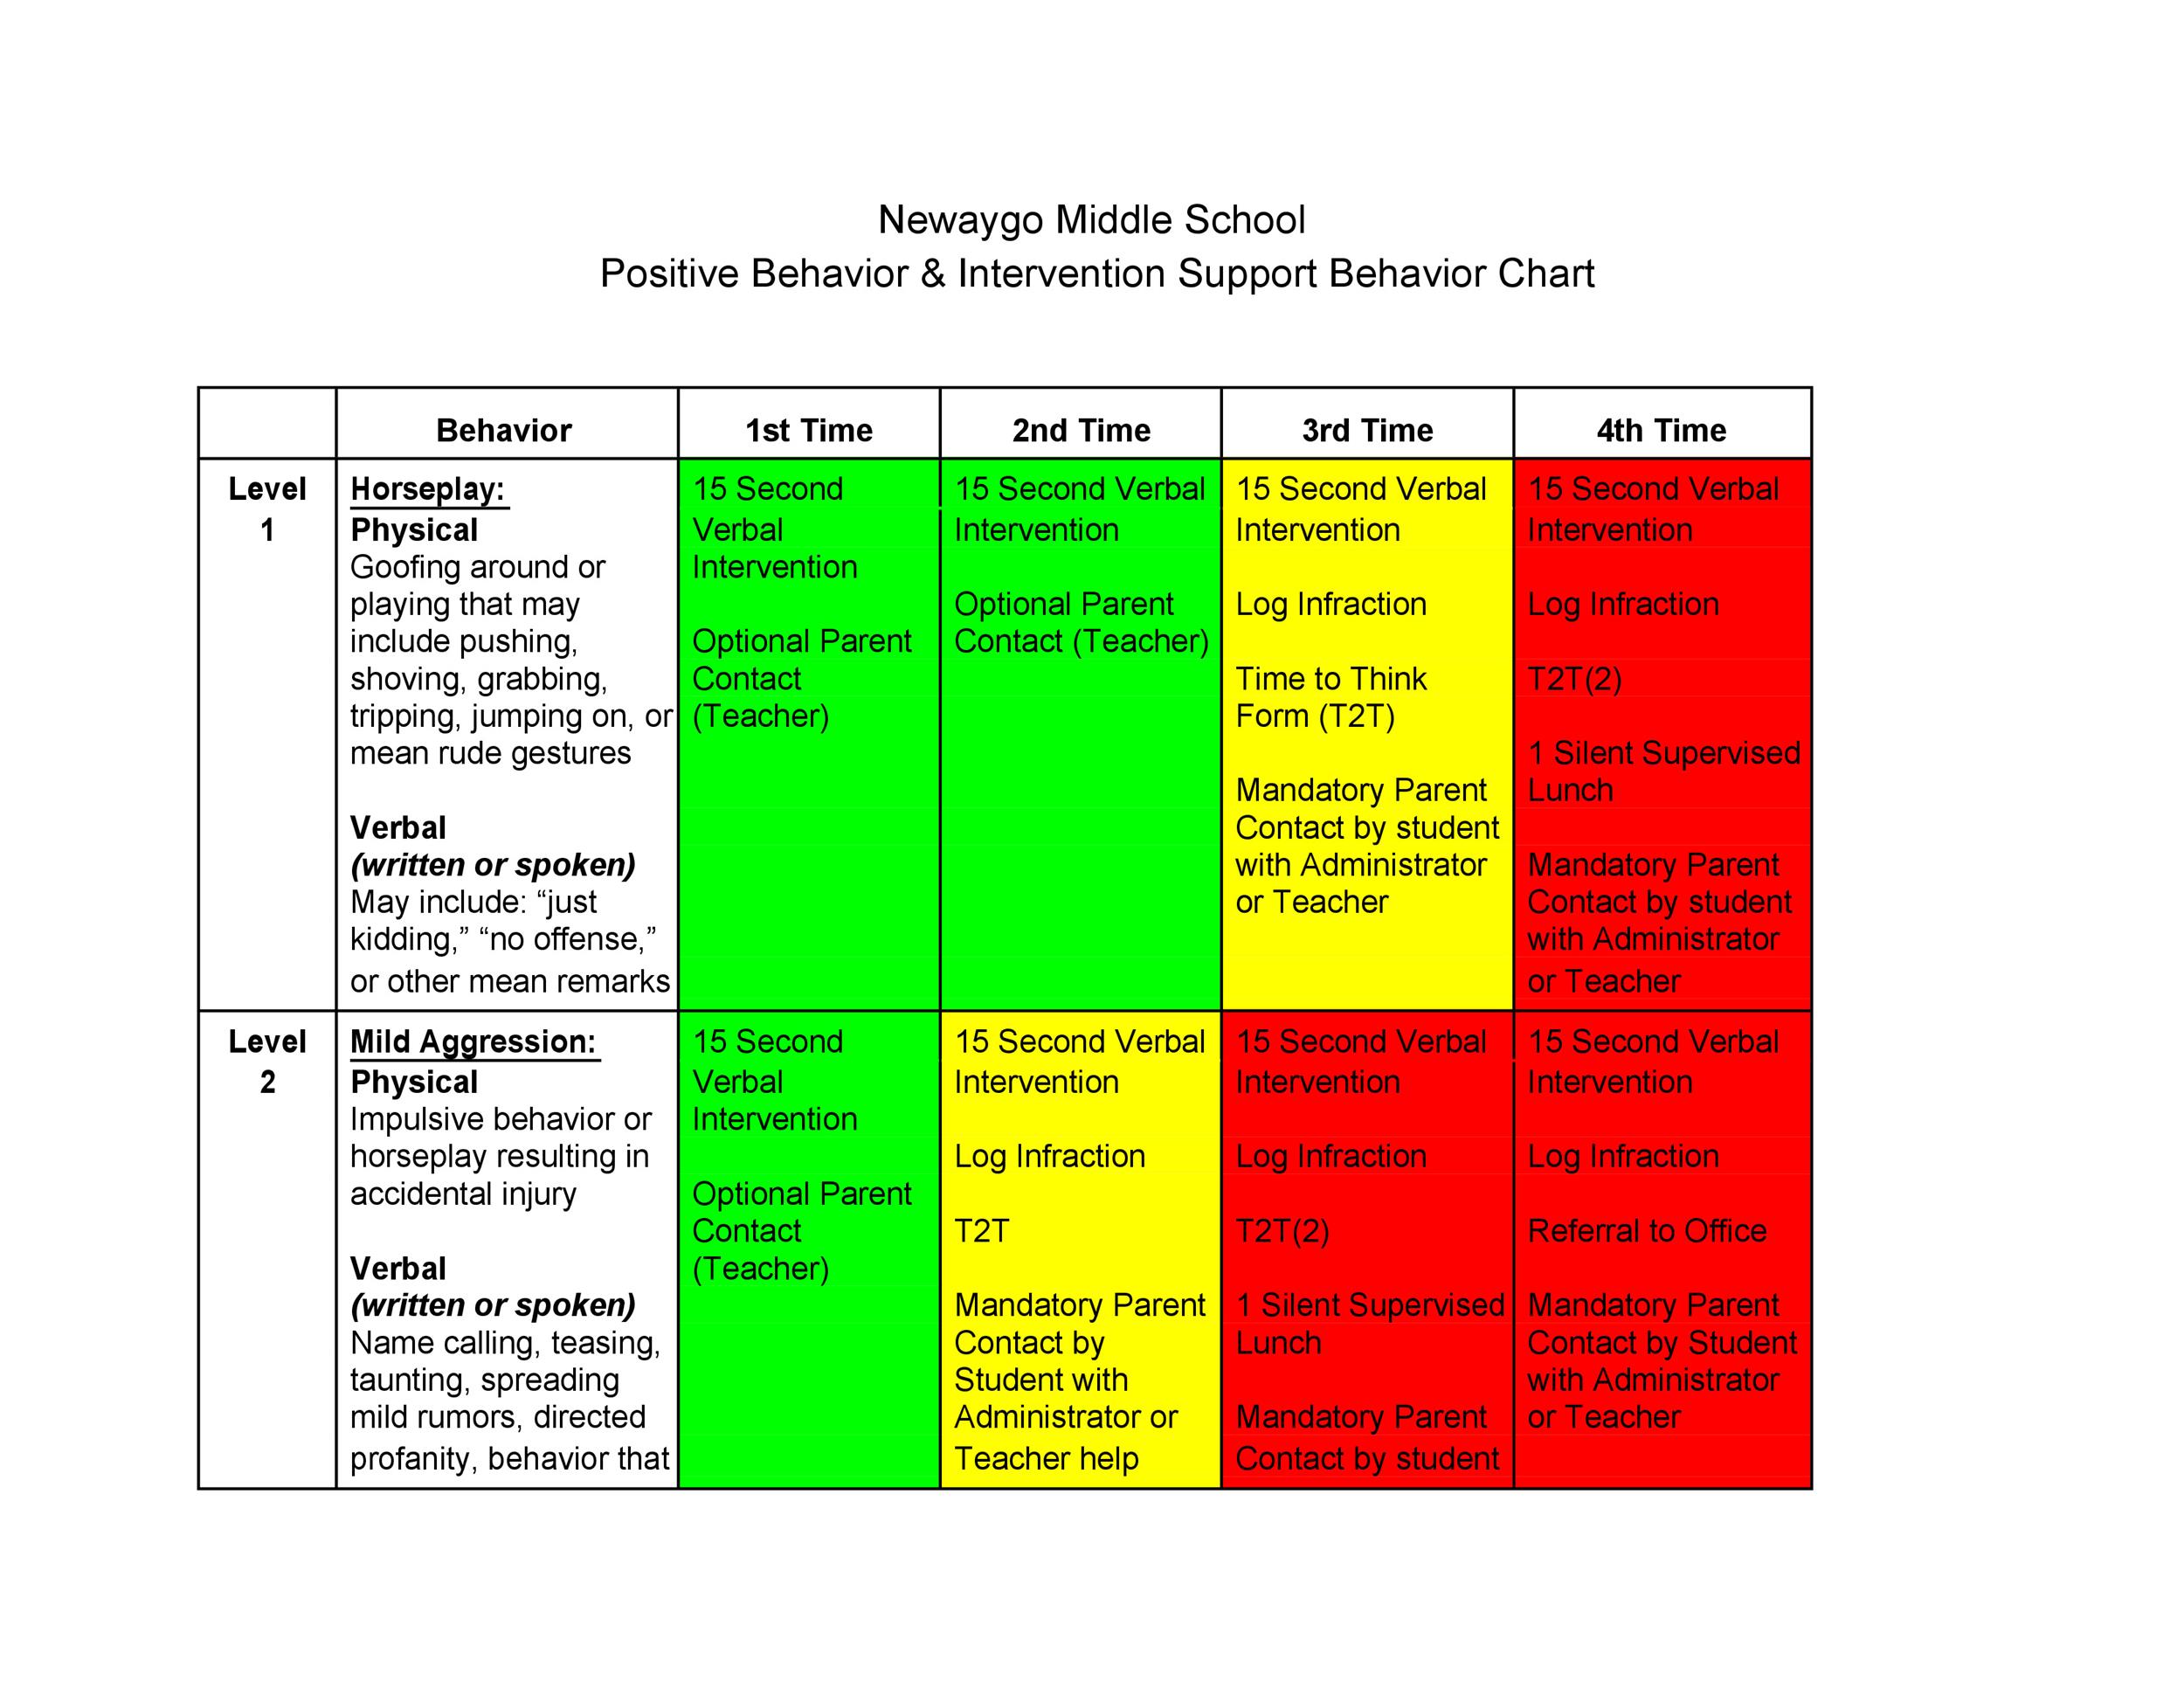 Behavior Chart For Middle School Students